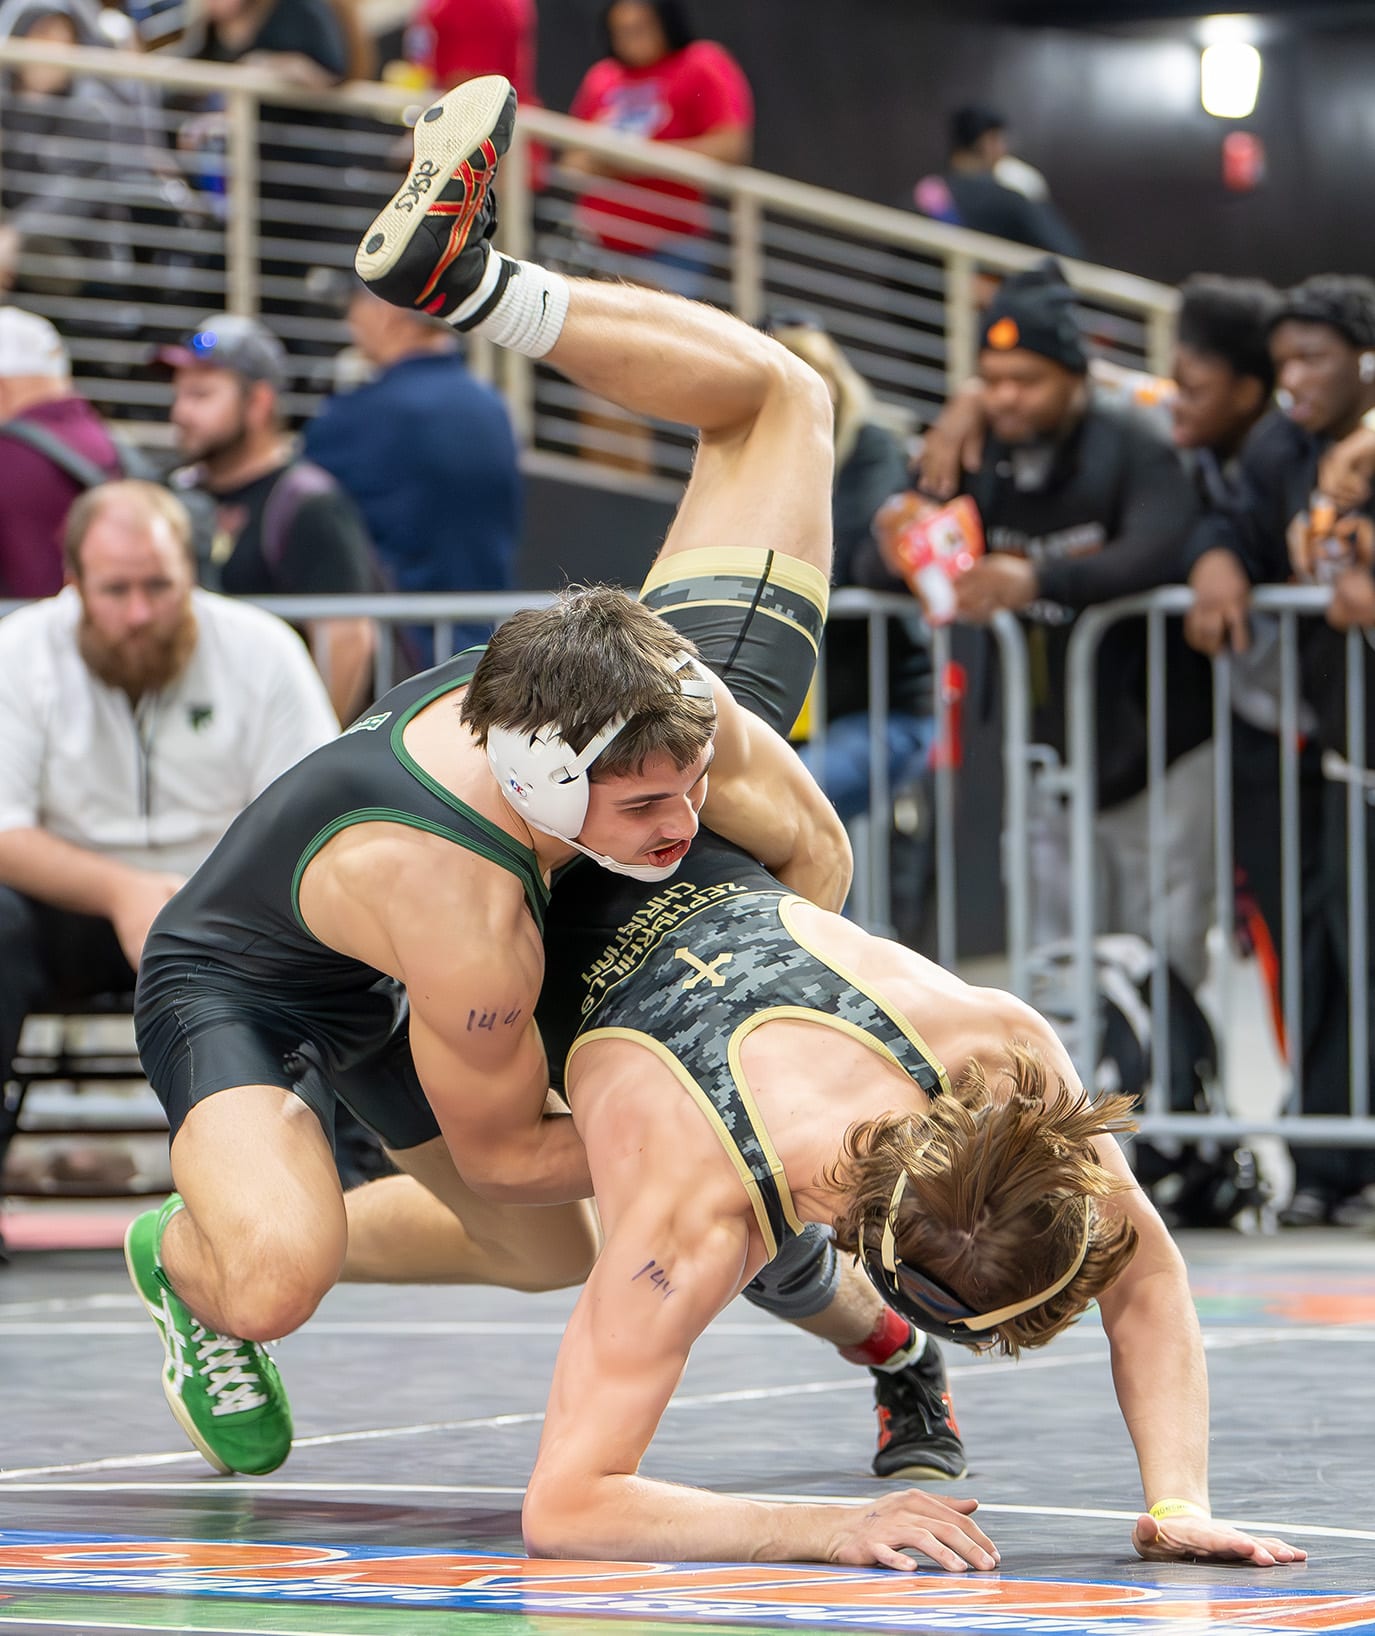 Weeki Wachee High 144 pound Ricky Bowermaster needed defeated Talon Maple from Zephyr Hills Christian by Fall at 3:41 at the 2024 FHSAA State Championship in Kissimmee. [Photo by Joe DiCristofalo]